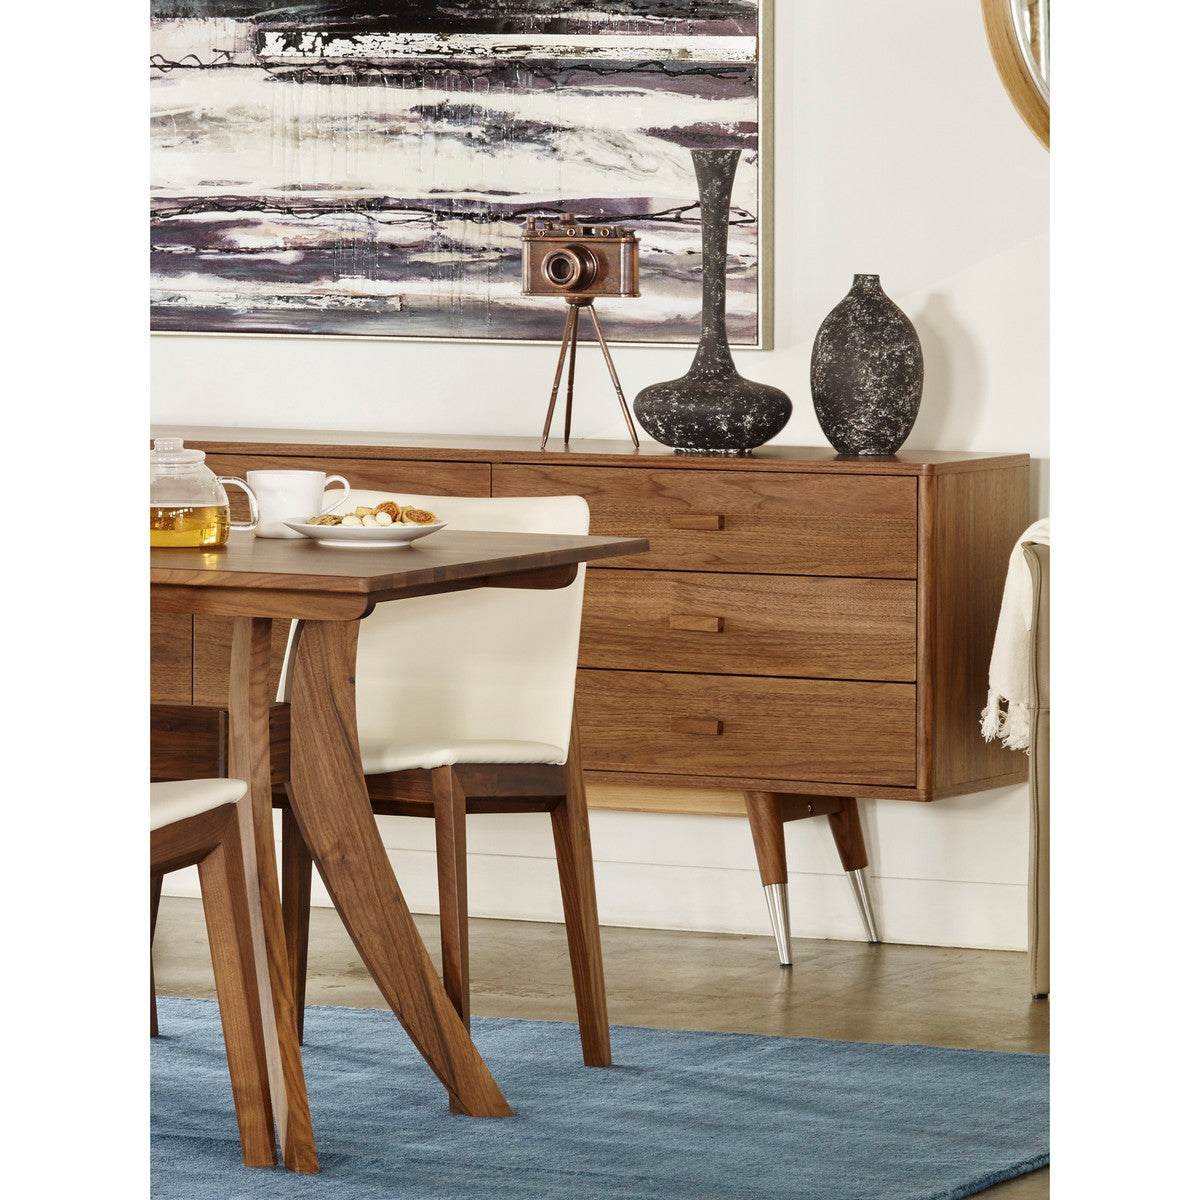 Moe's Home Collection Sienna Sideboard Walnut Small - CB-1023-03 - Moe's Home Collection - Sideboards - Minimal And Modern - 1